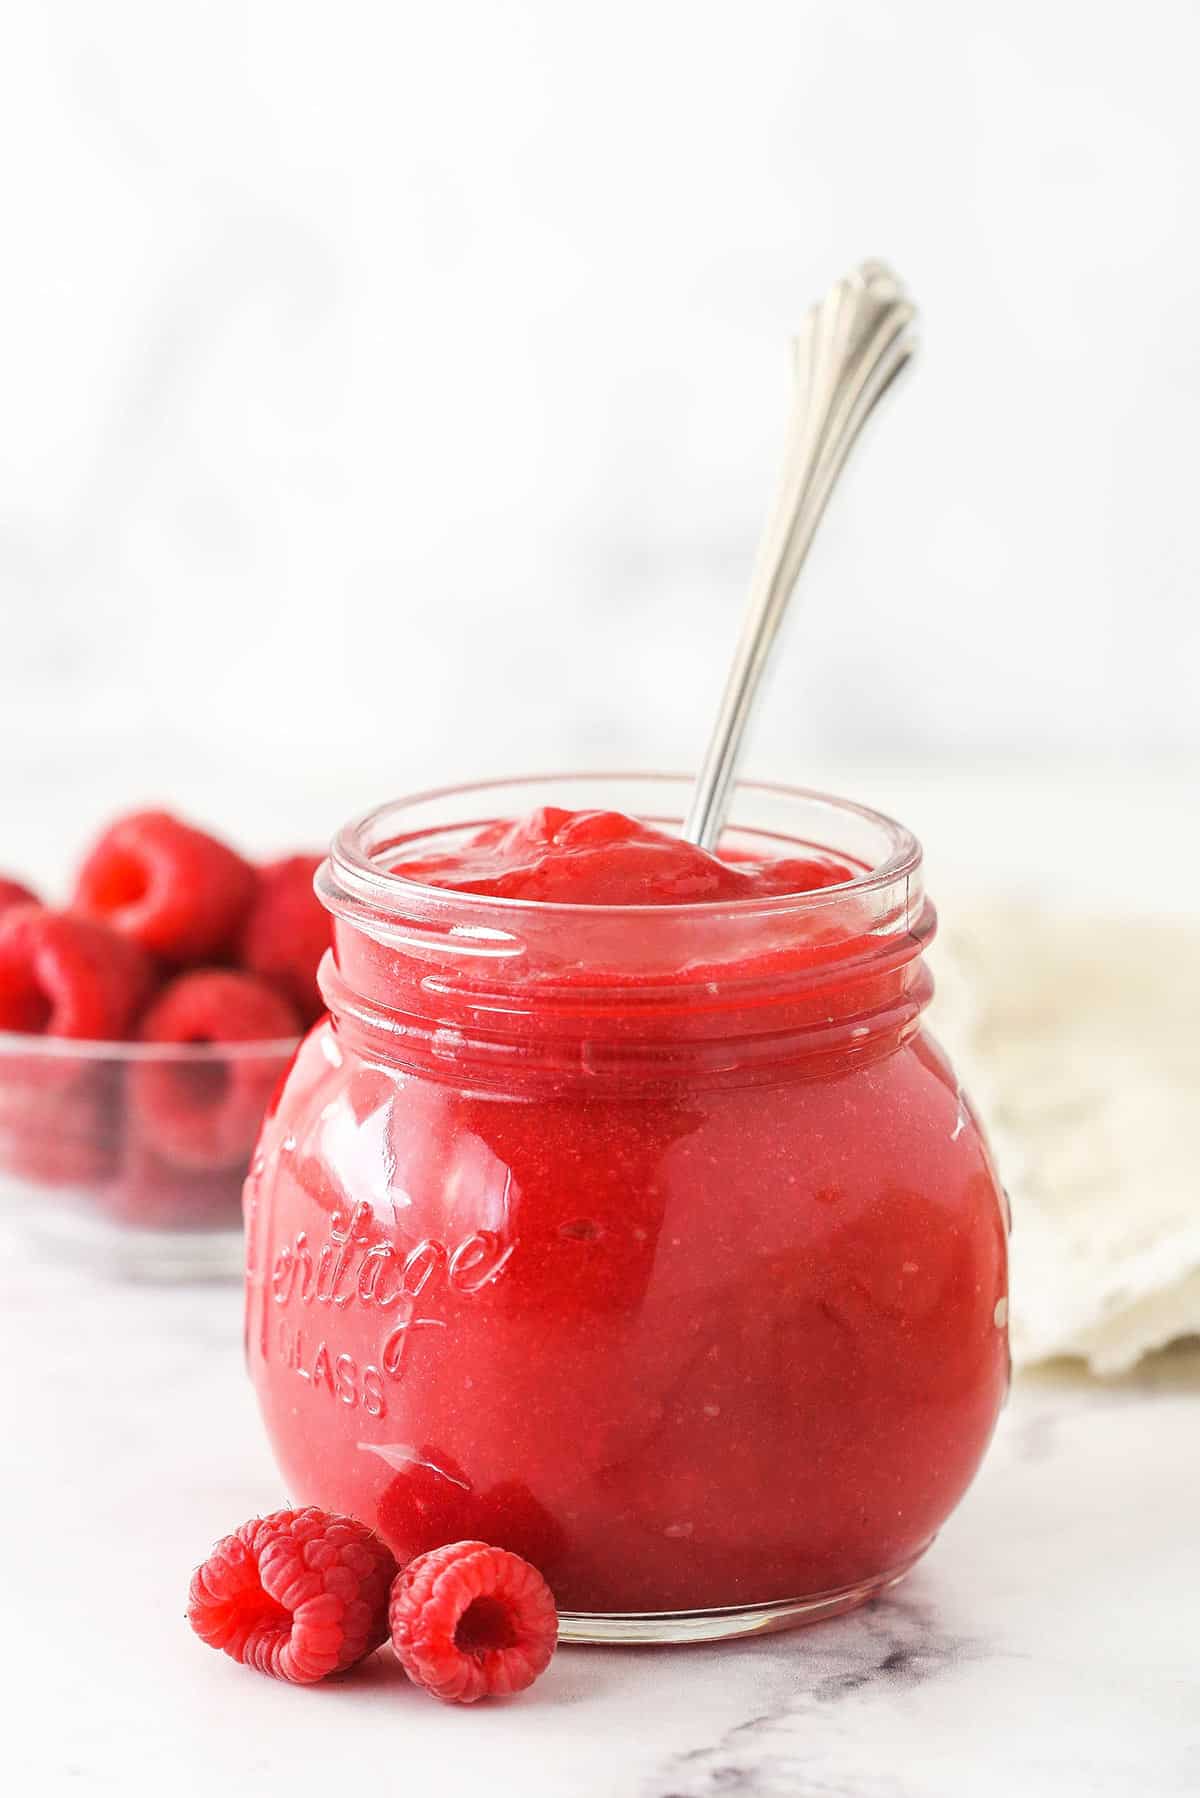 Raspberry filling for cake in a jar with a spoon.